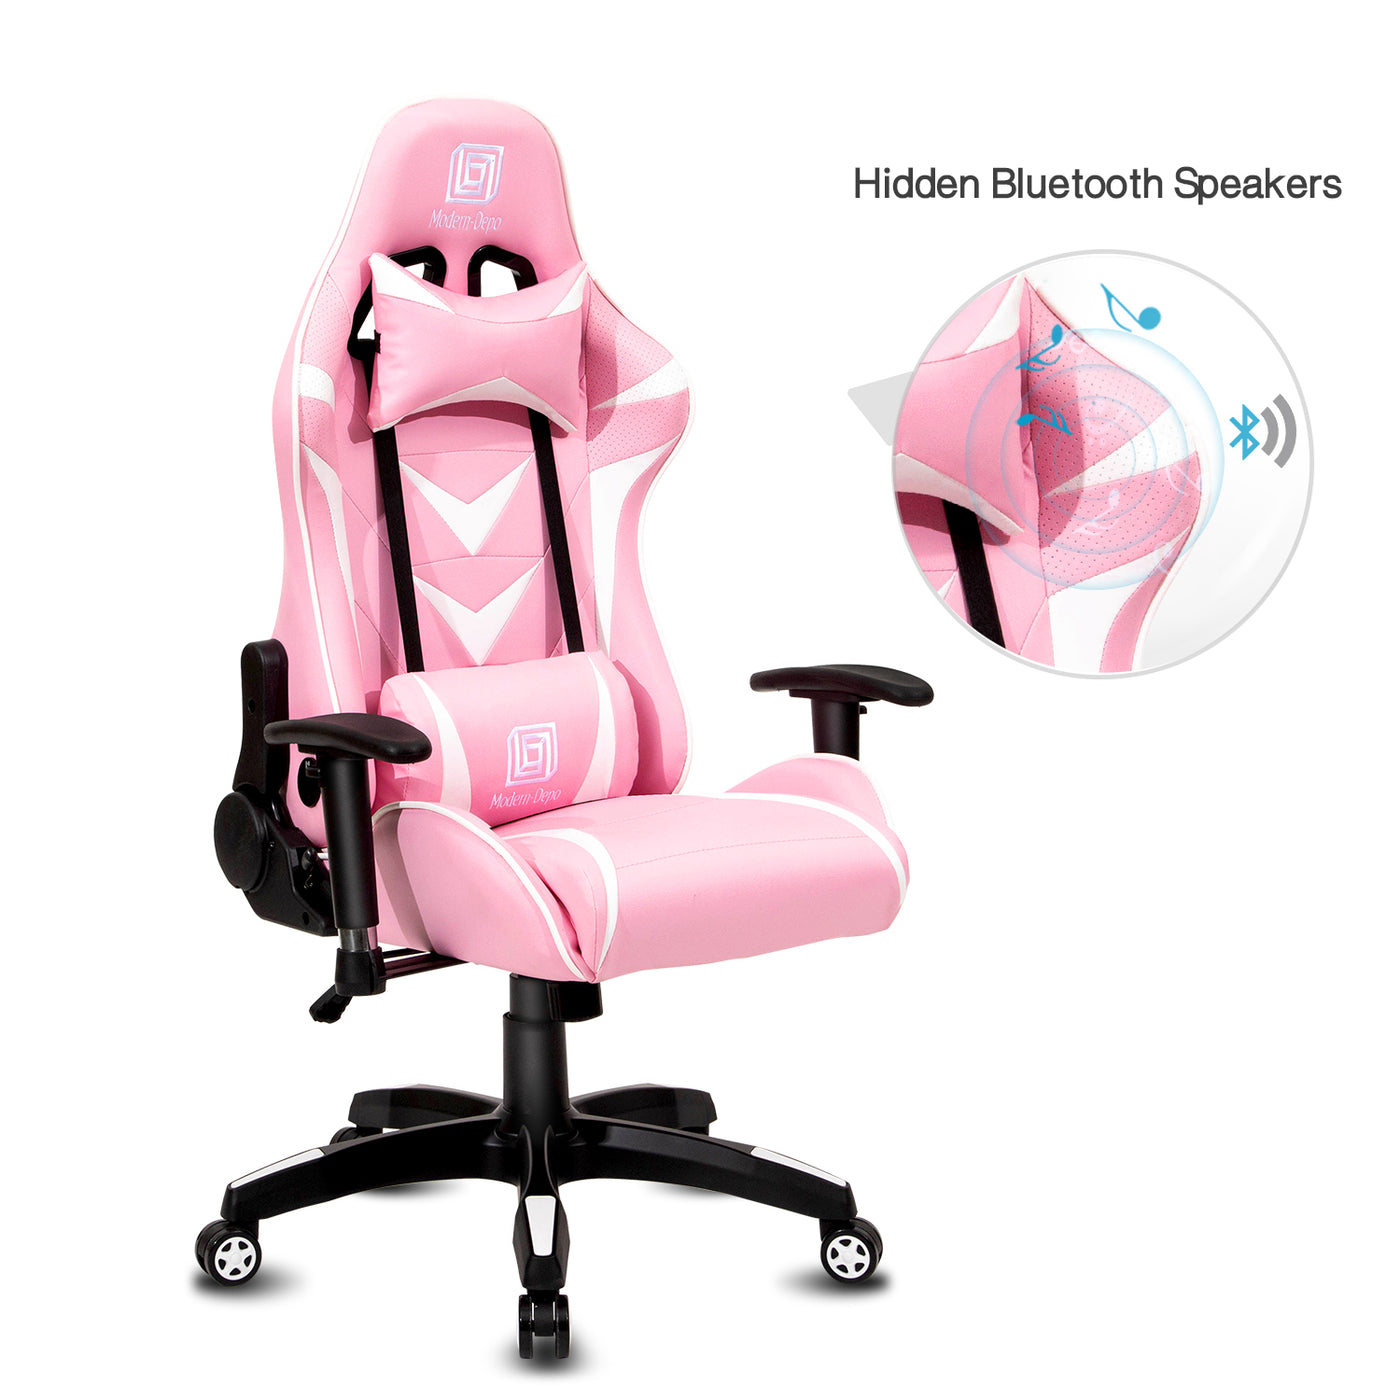 Computer Gaming Chair Bluetooth Speakers Ergonomic Office Chairs Swivel Recliner